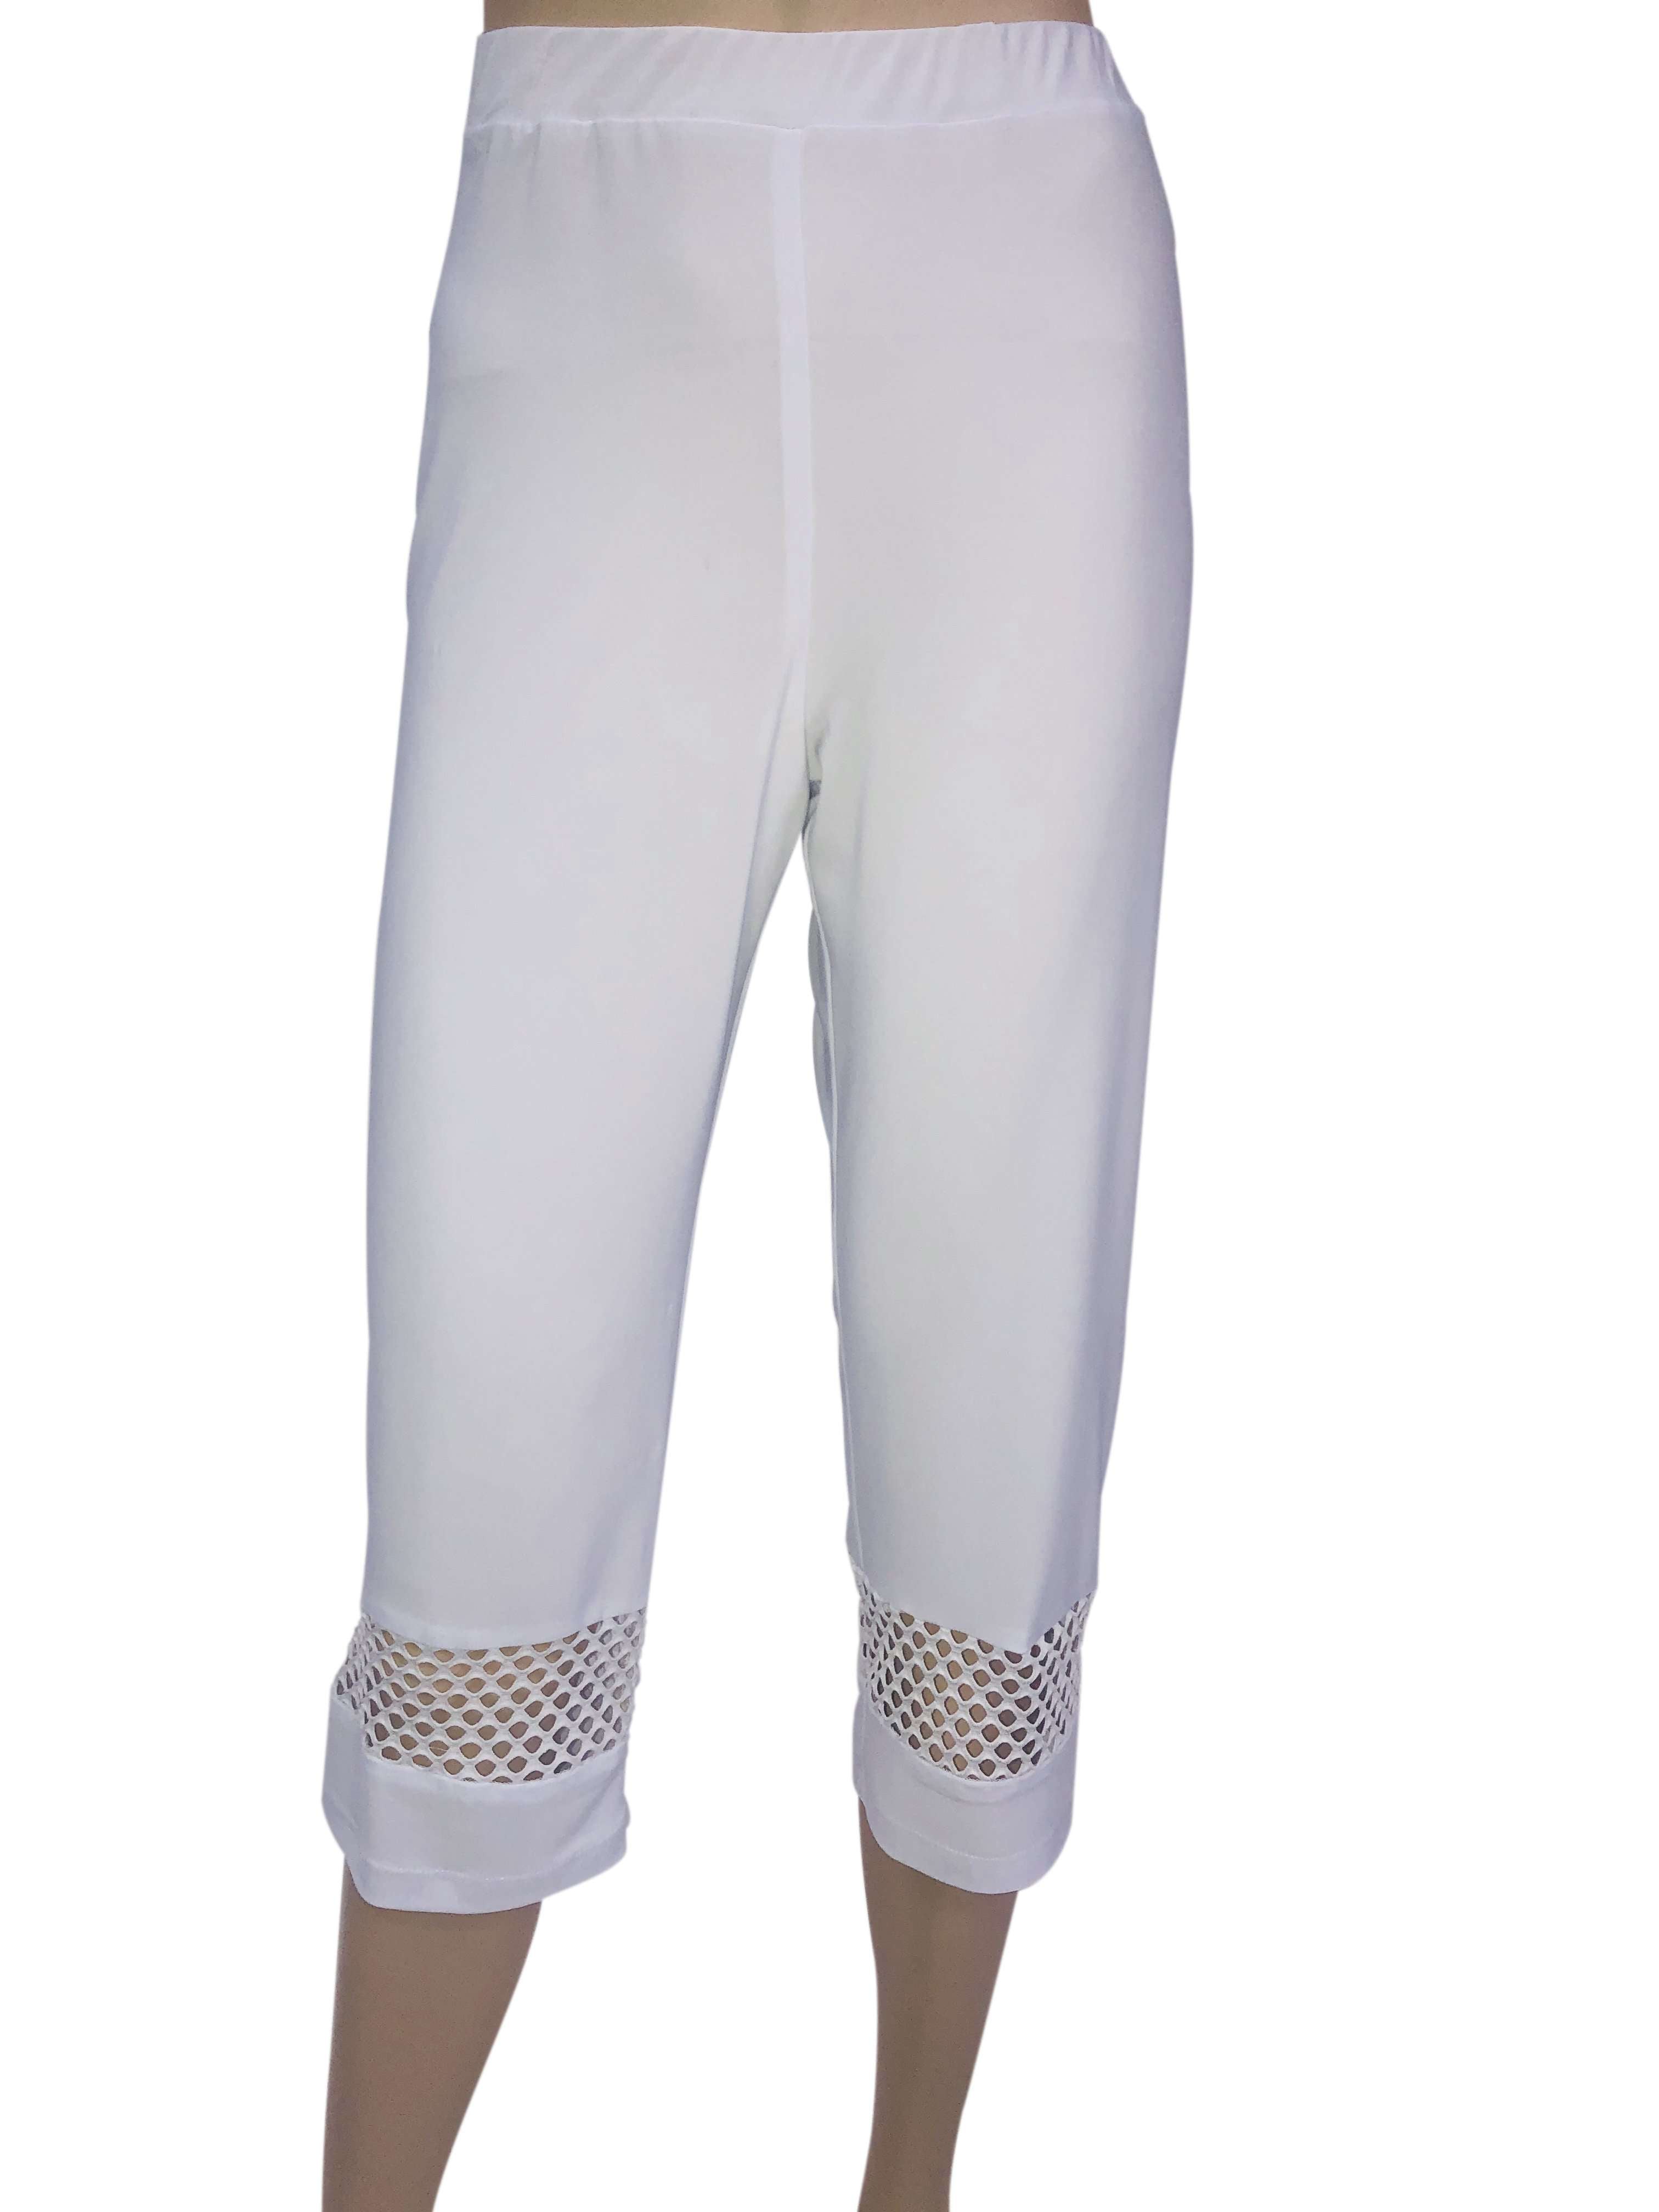 Women's Capri's White Capri Pants On Sale Lace Insert Quality Stretch Pull  On Design Made In Canada On Sale 50% Off